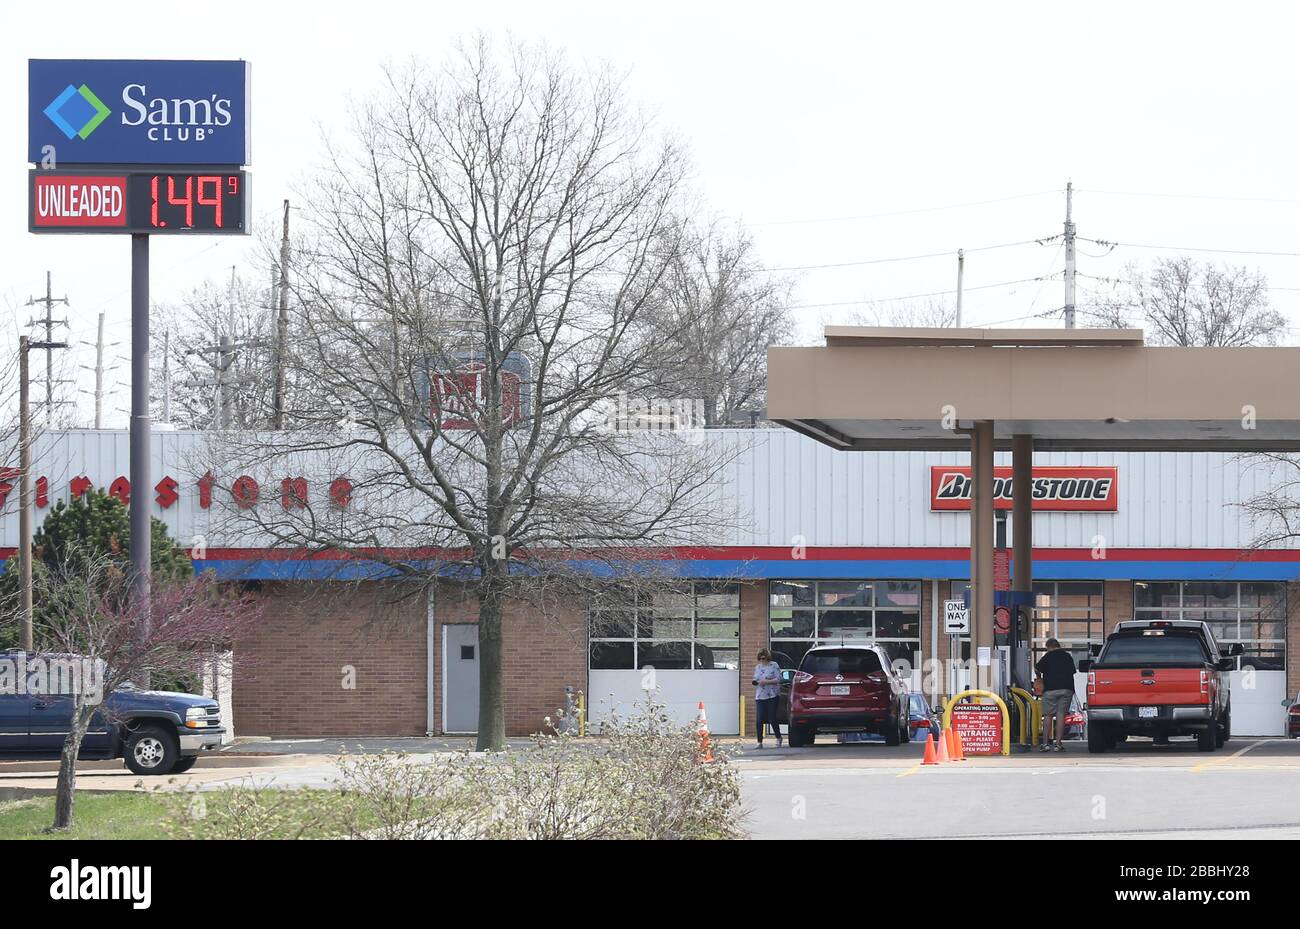 St. Louis, United States. 31st Mar, 2020. Price per gallon of regular unleaded is $1.49 at this Sam's Club in south St. Louis County on Tuesday, March 31, 2020. Prices at the pump have declined as oil prices trade at their lowest level in nearly two decades. Photo by Bill Greenblatt/UPI Credit: UPI/Alamy Live News Stock Photo